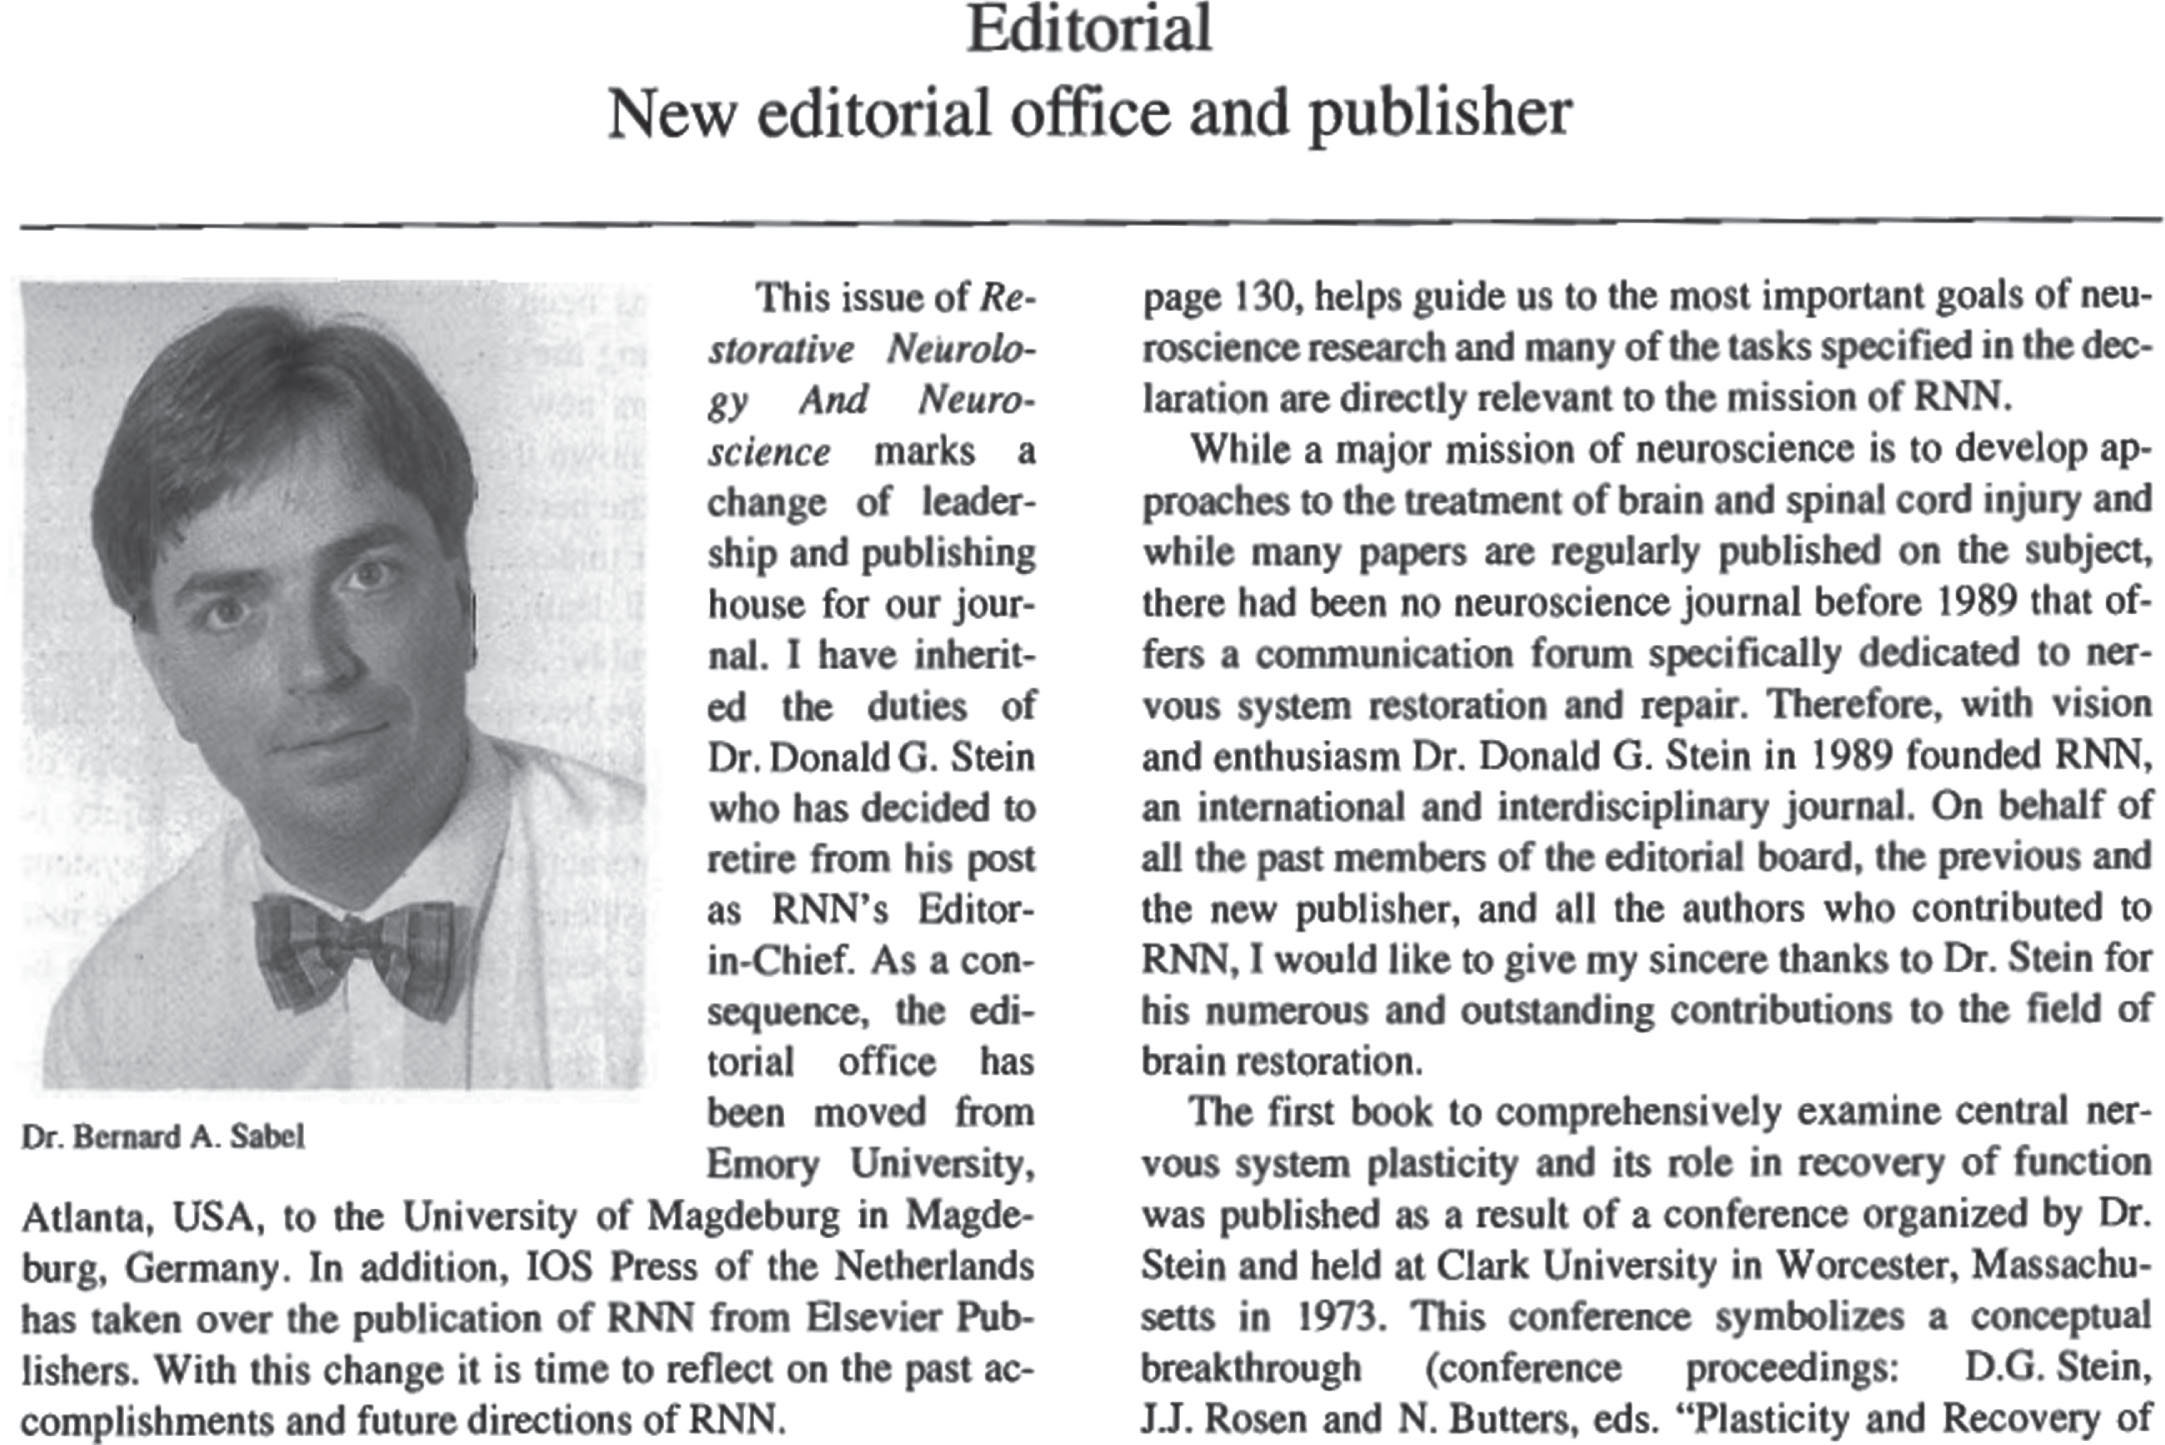 Editorial introducing Bernhard A. Sabel as new editor-in-chief in 1997.